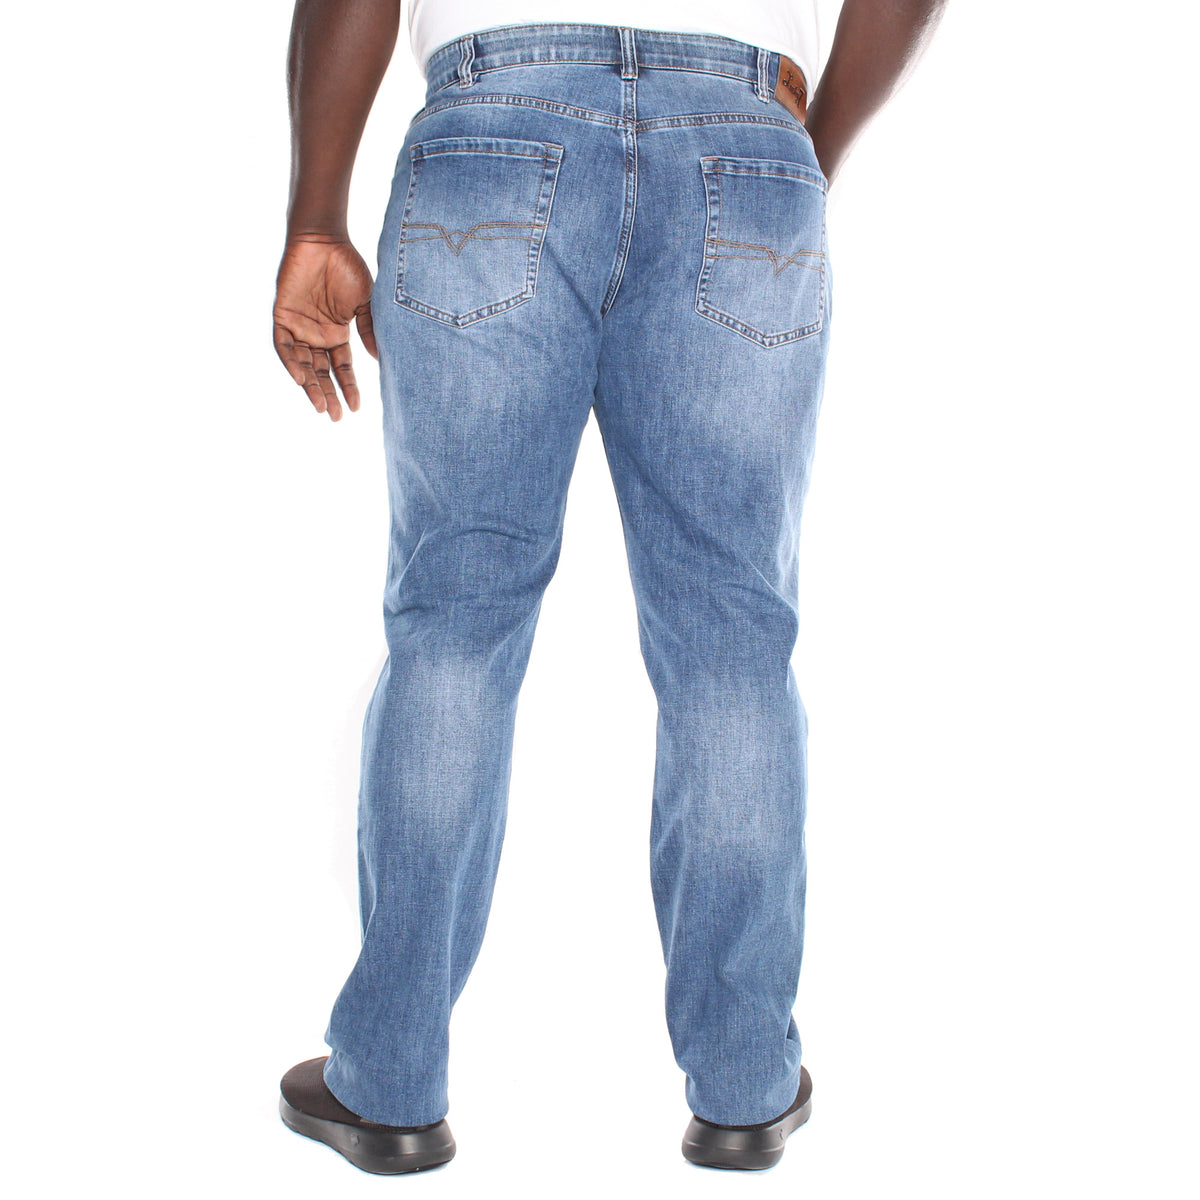 Stretch Jeans, Regular Waist, Tapered Fit